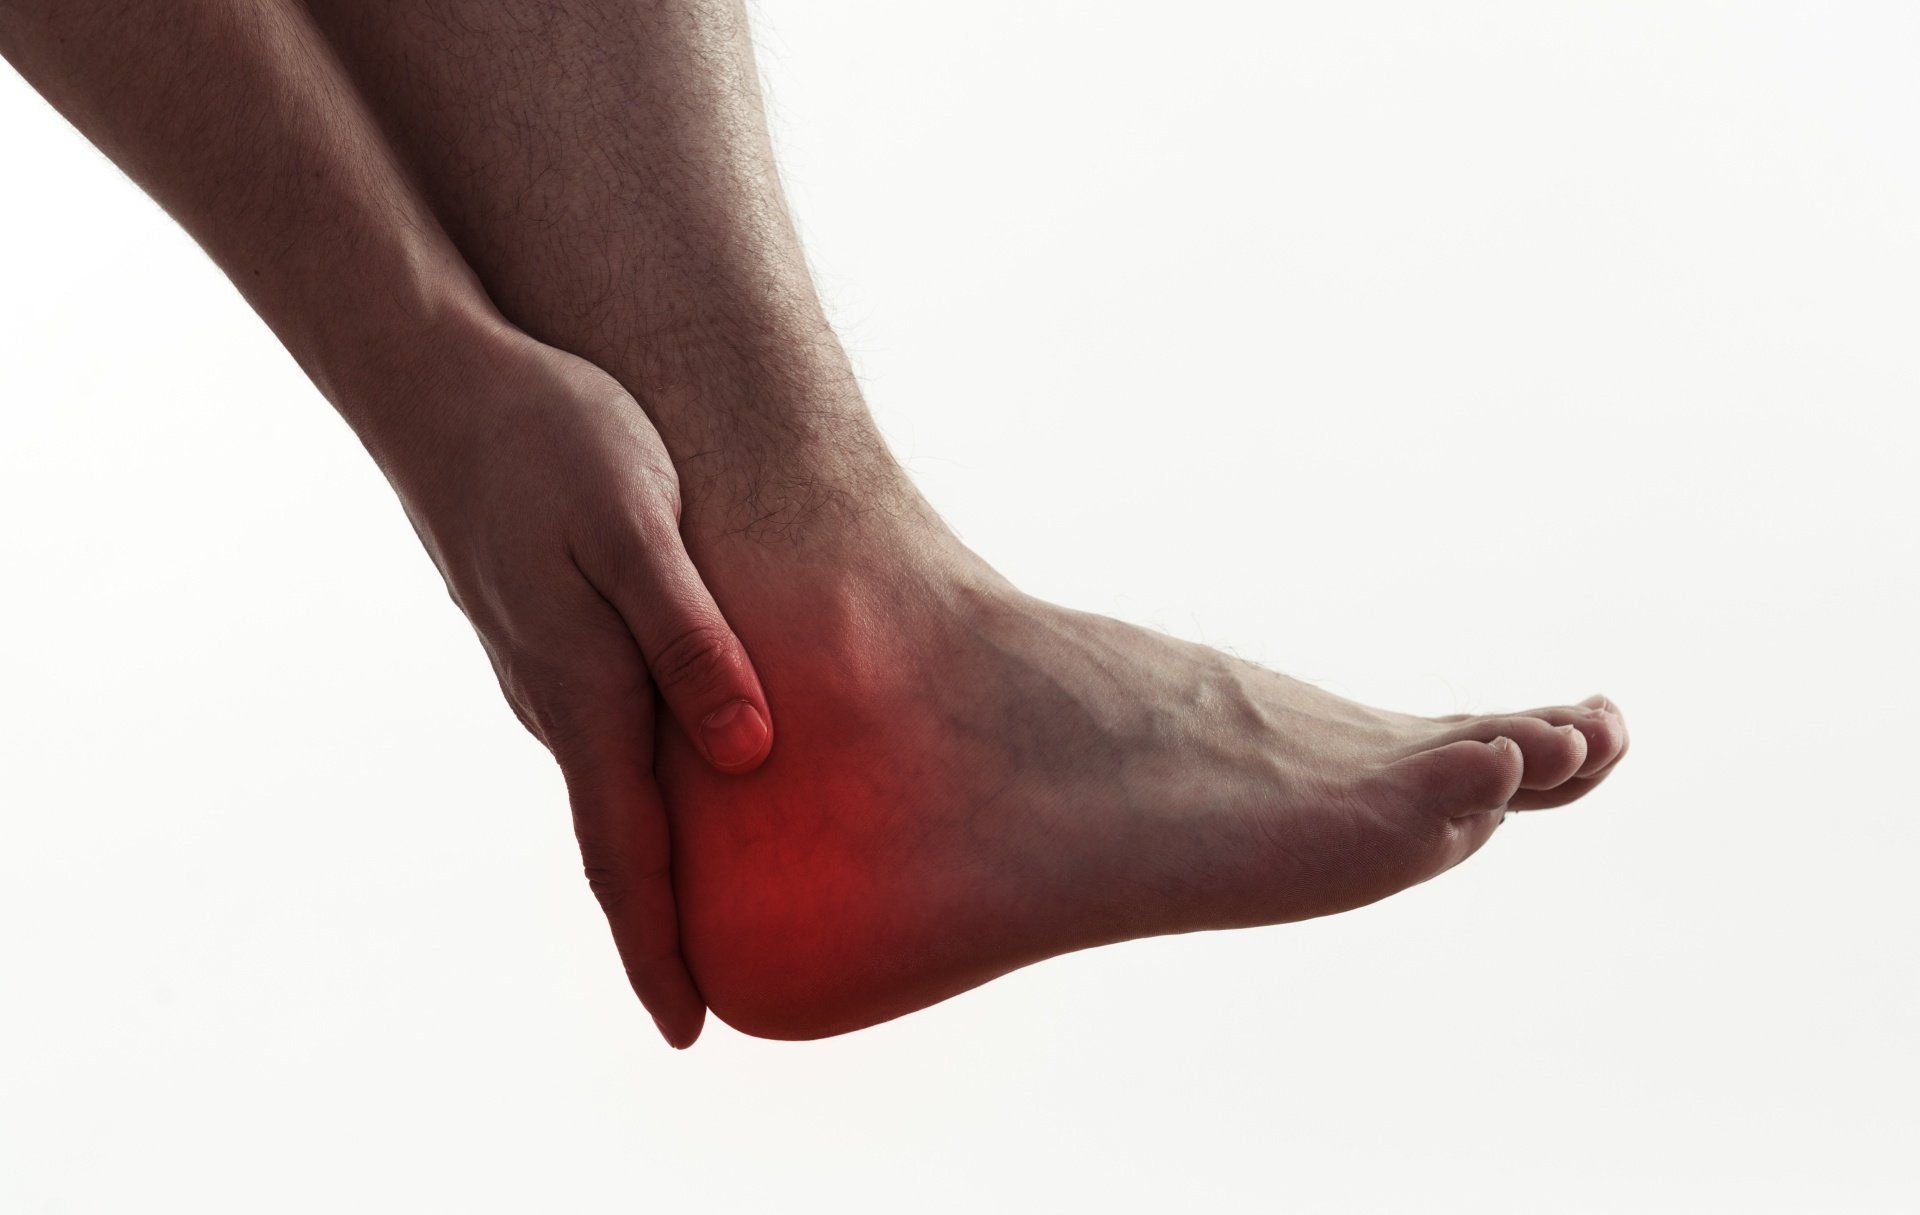 Still Having Foot Pain After Surgery? | Austin Foot and Ankle Specialists